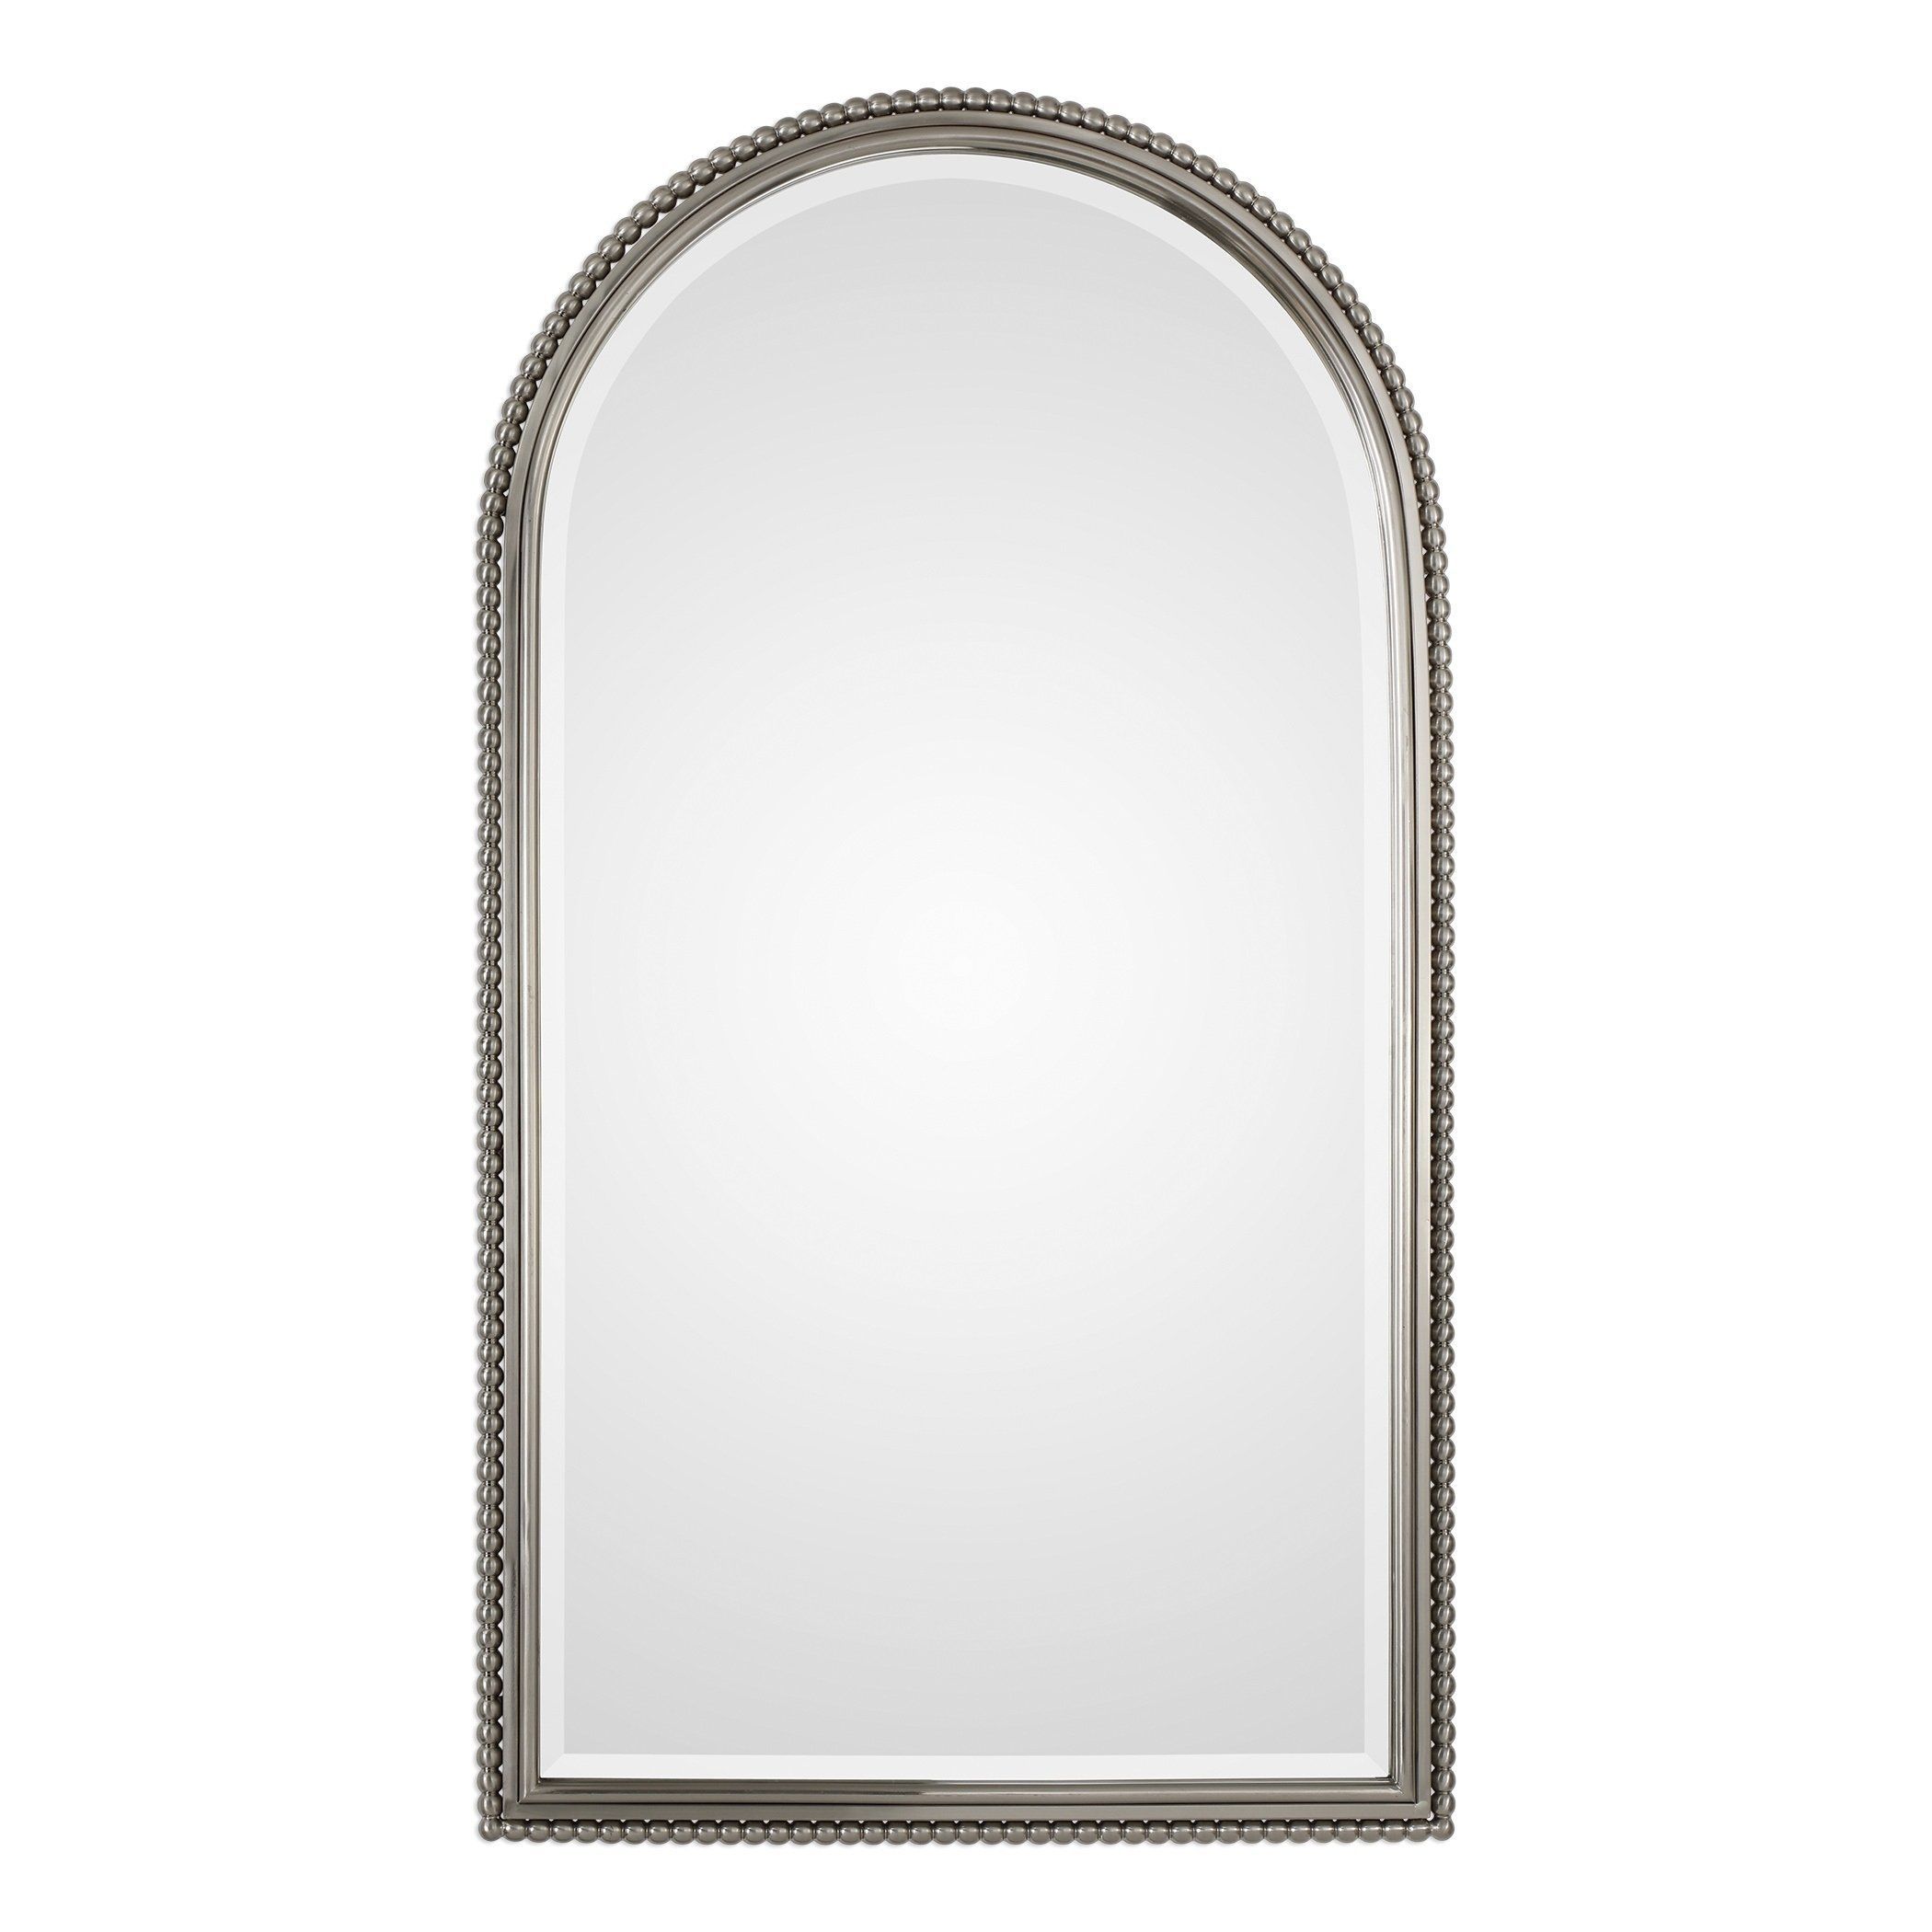 Uttermost Sherise Arch Plated Brushed Nickel Mirror | Arch Mirror In Brushed Nickel Octagon Mirrors (View 8 of 15)